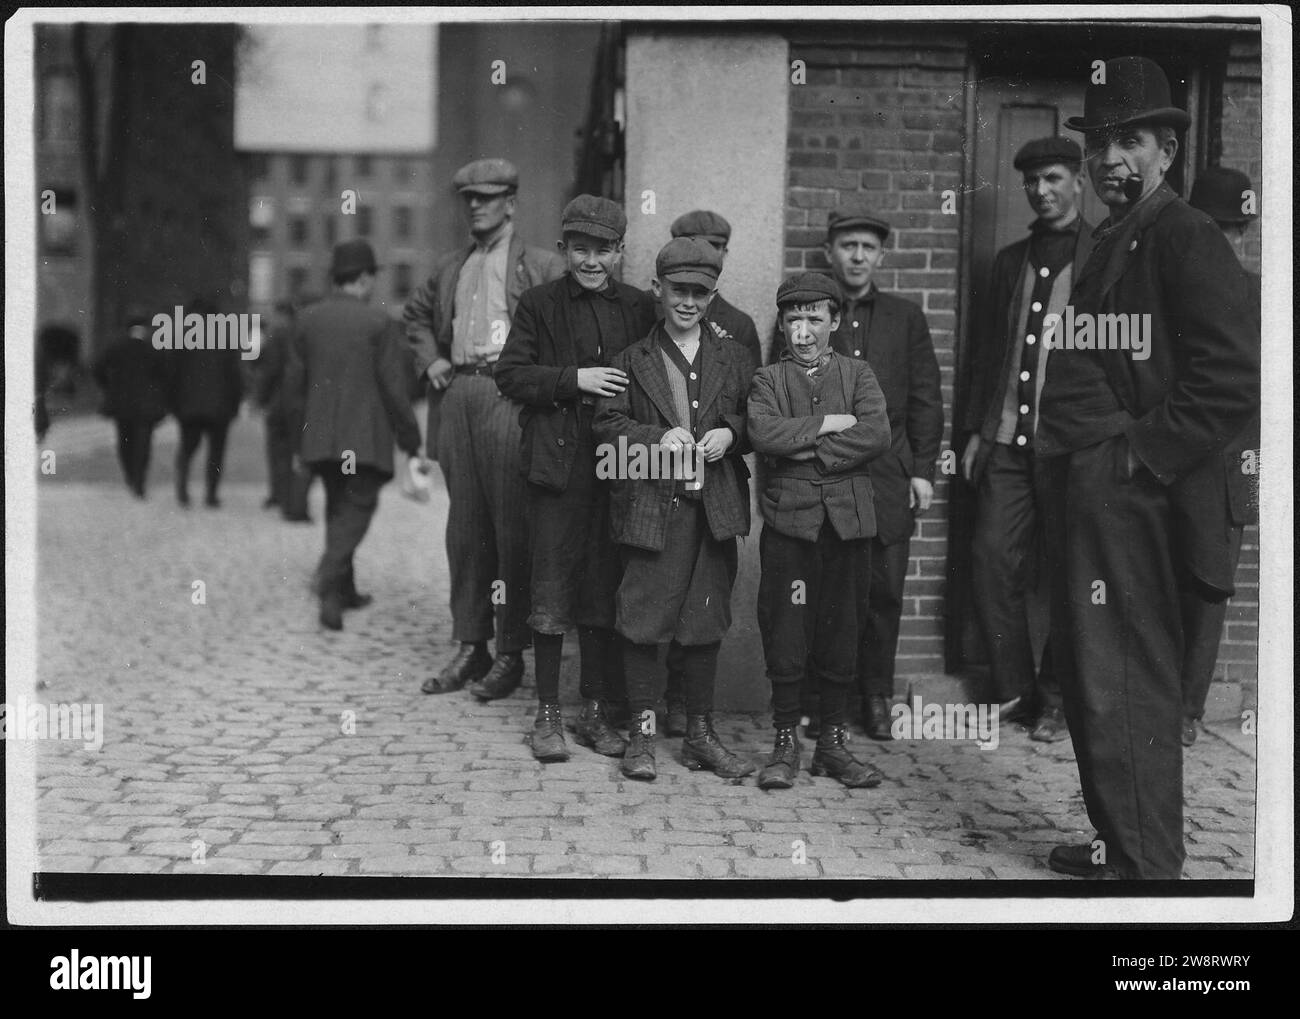 Workers in Merrimac Mill. Robert, smallest, 12 years old. Michael Keefe, next in size, about 13 or 14 years old.... Stock Photo